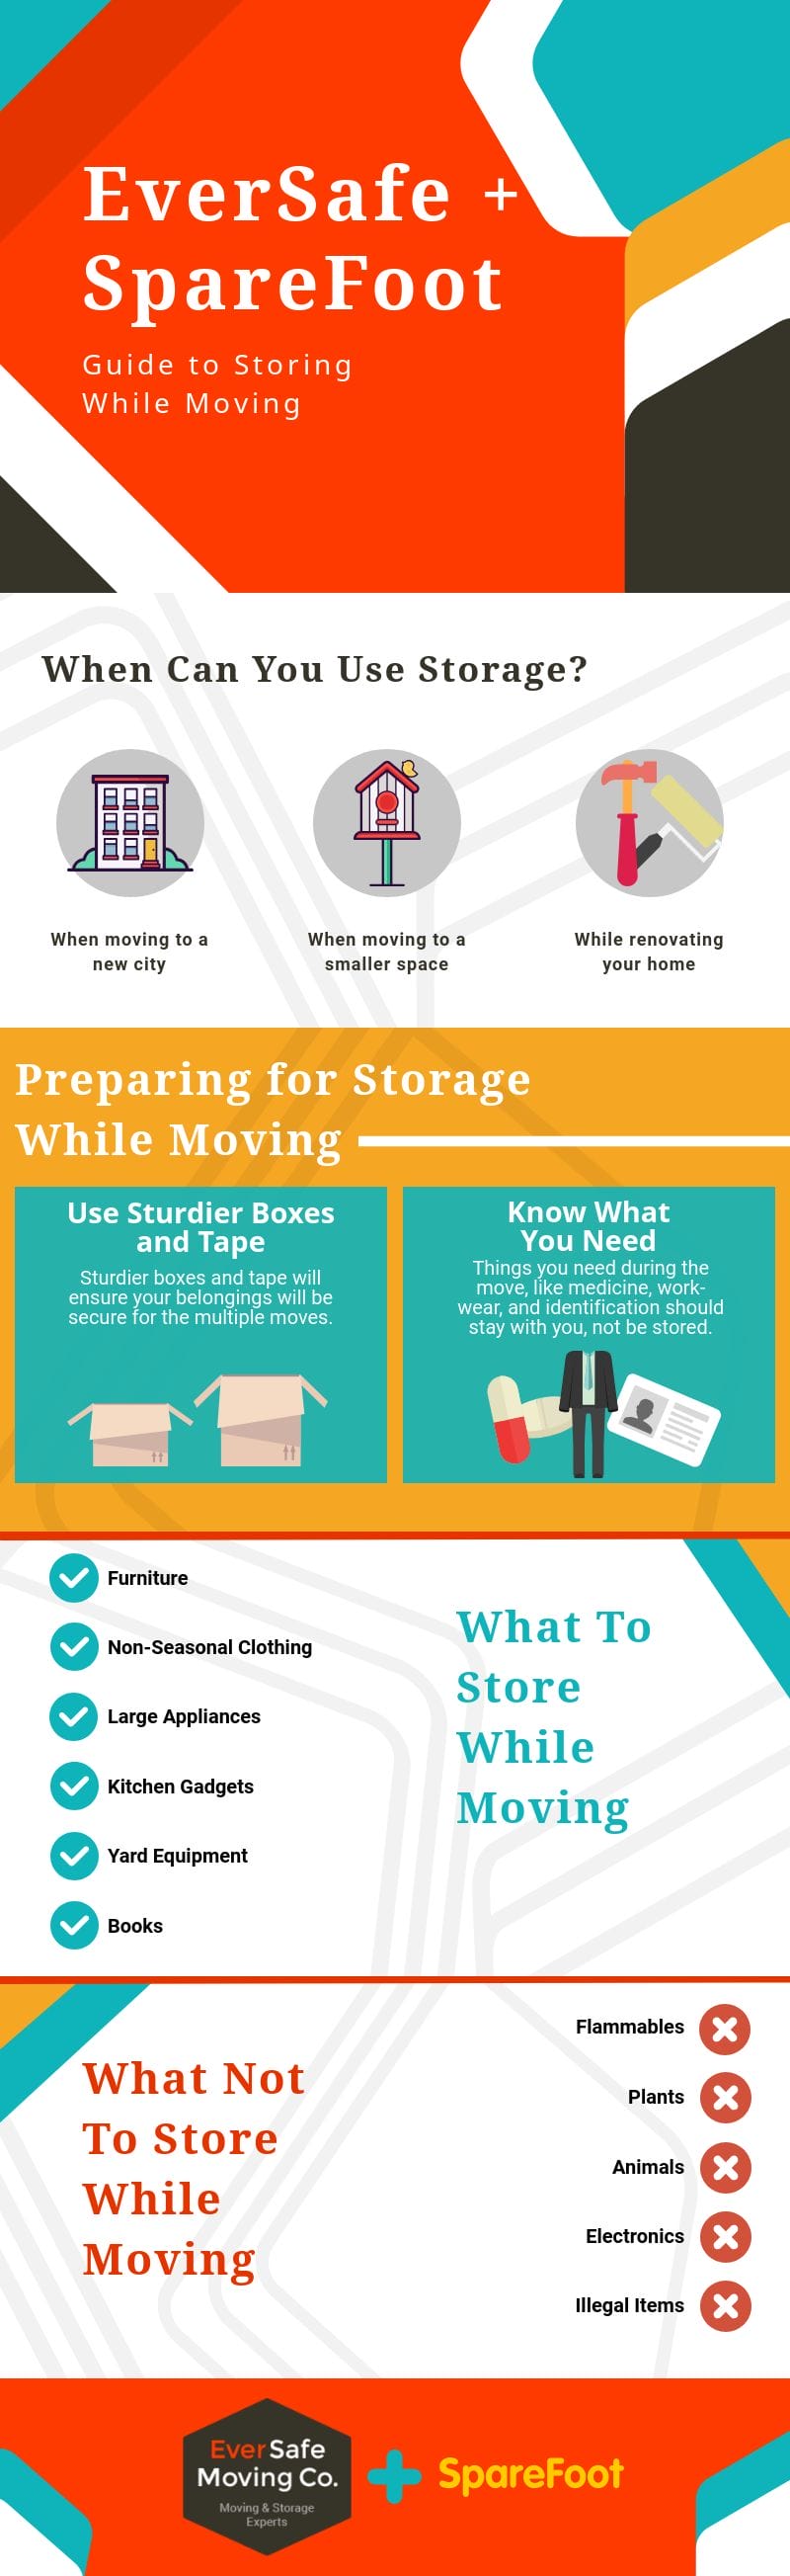 Downloadable Infographic Showing How to Store Your Belongings While Moving